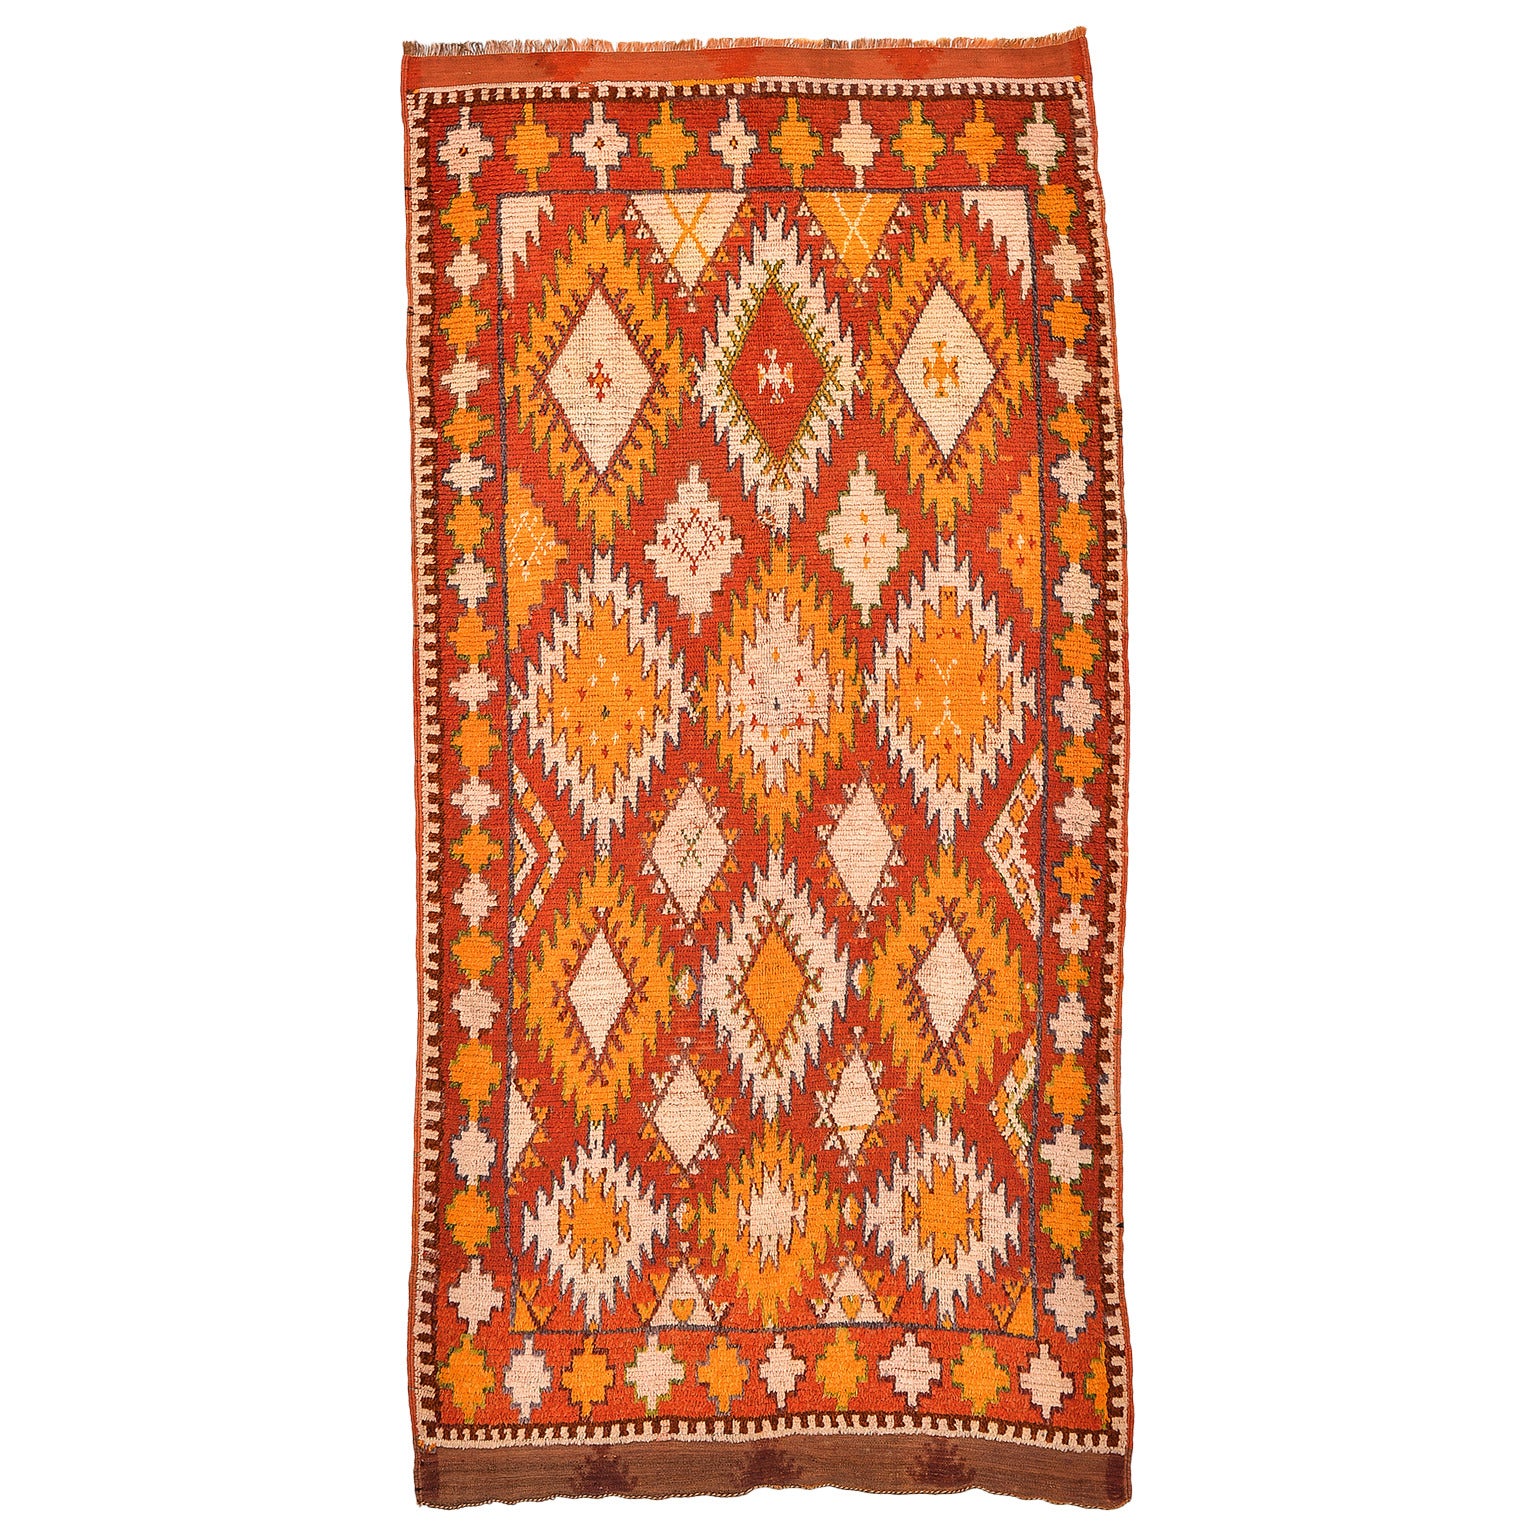  Yellow and Red Vintage Ait Touaya Moroccan Rug - 